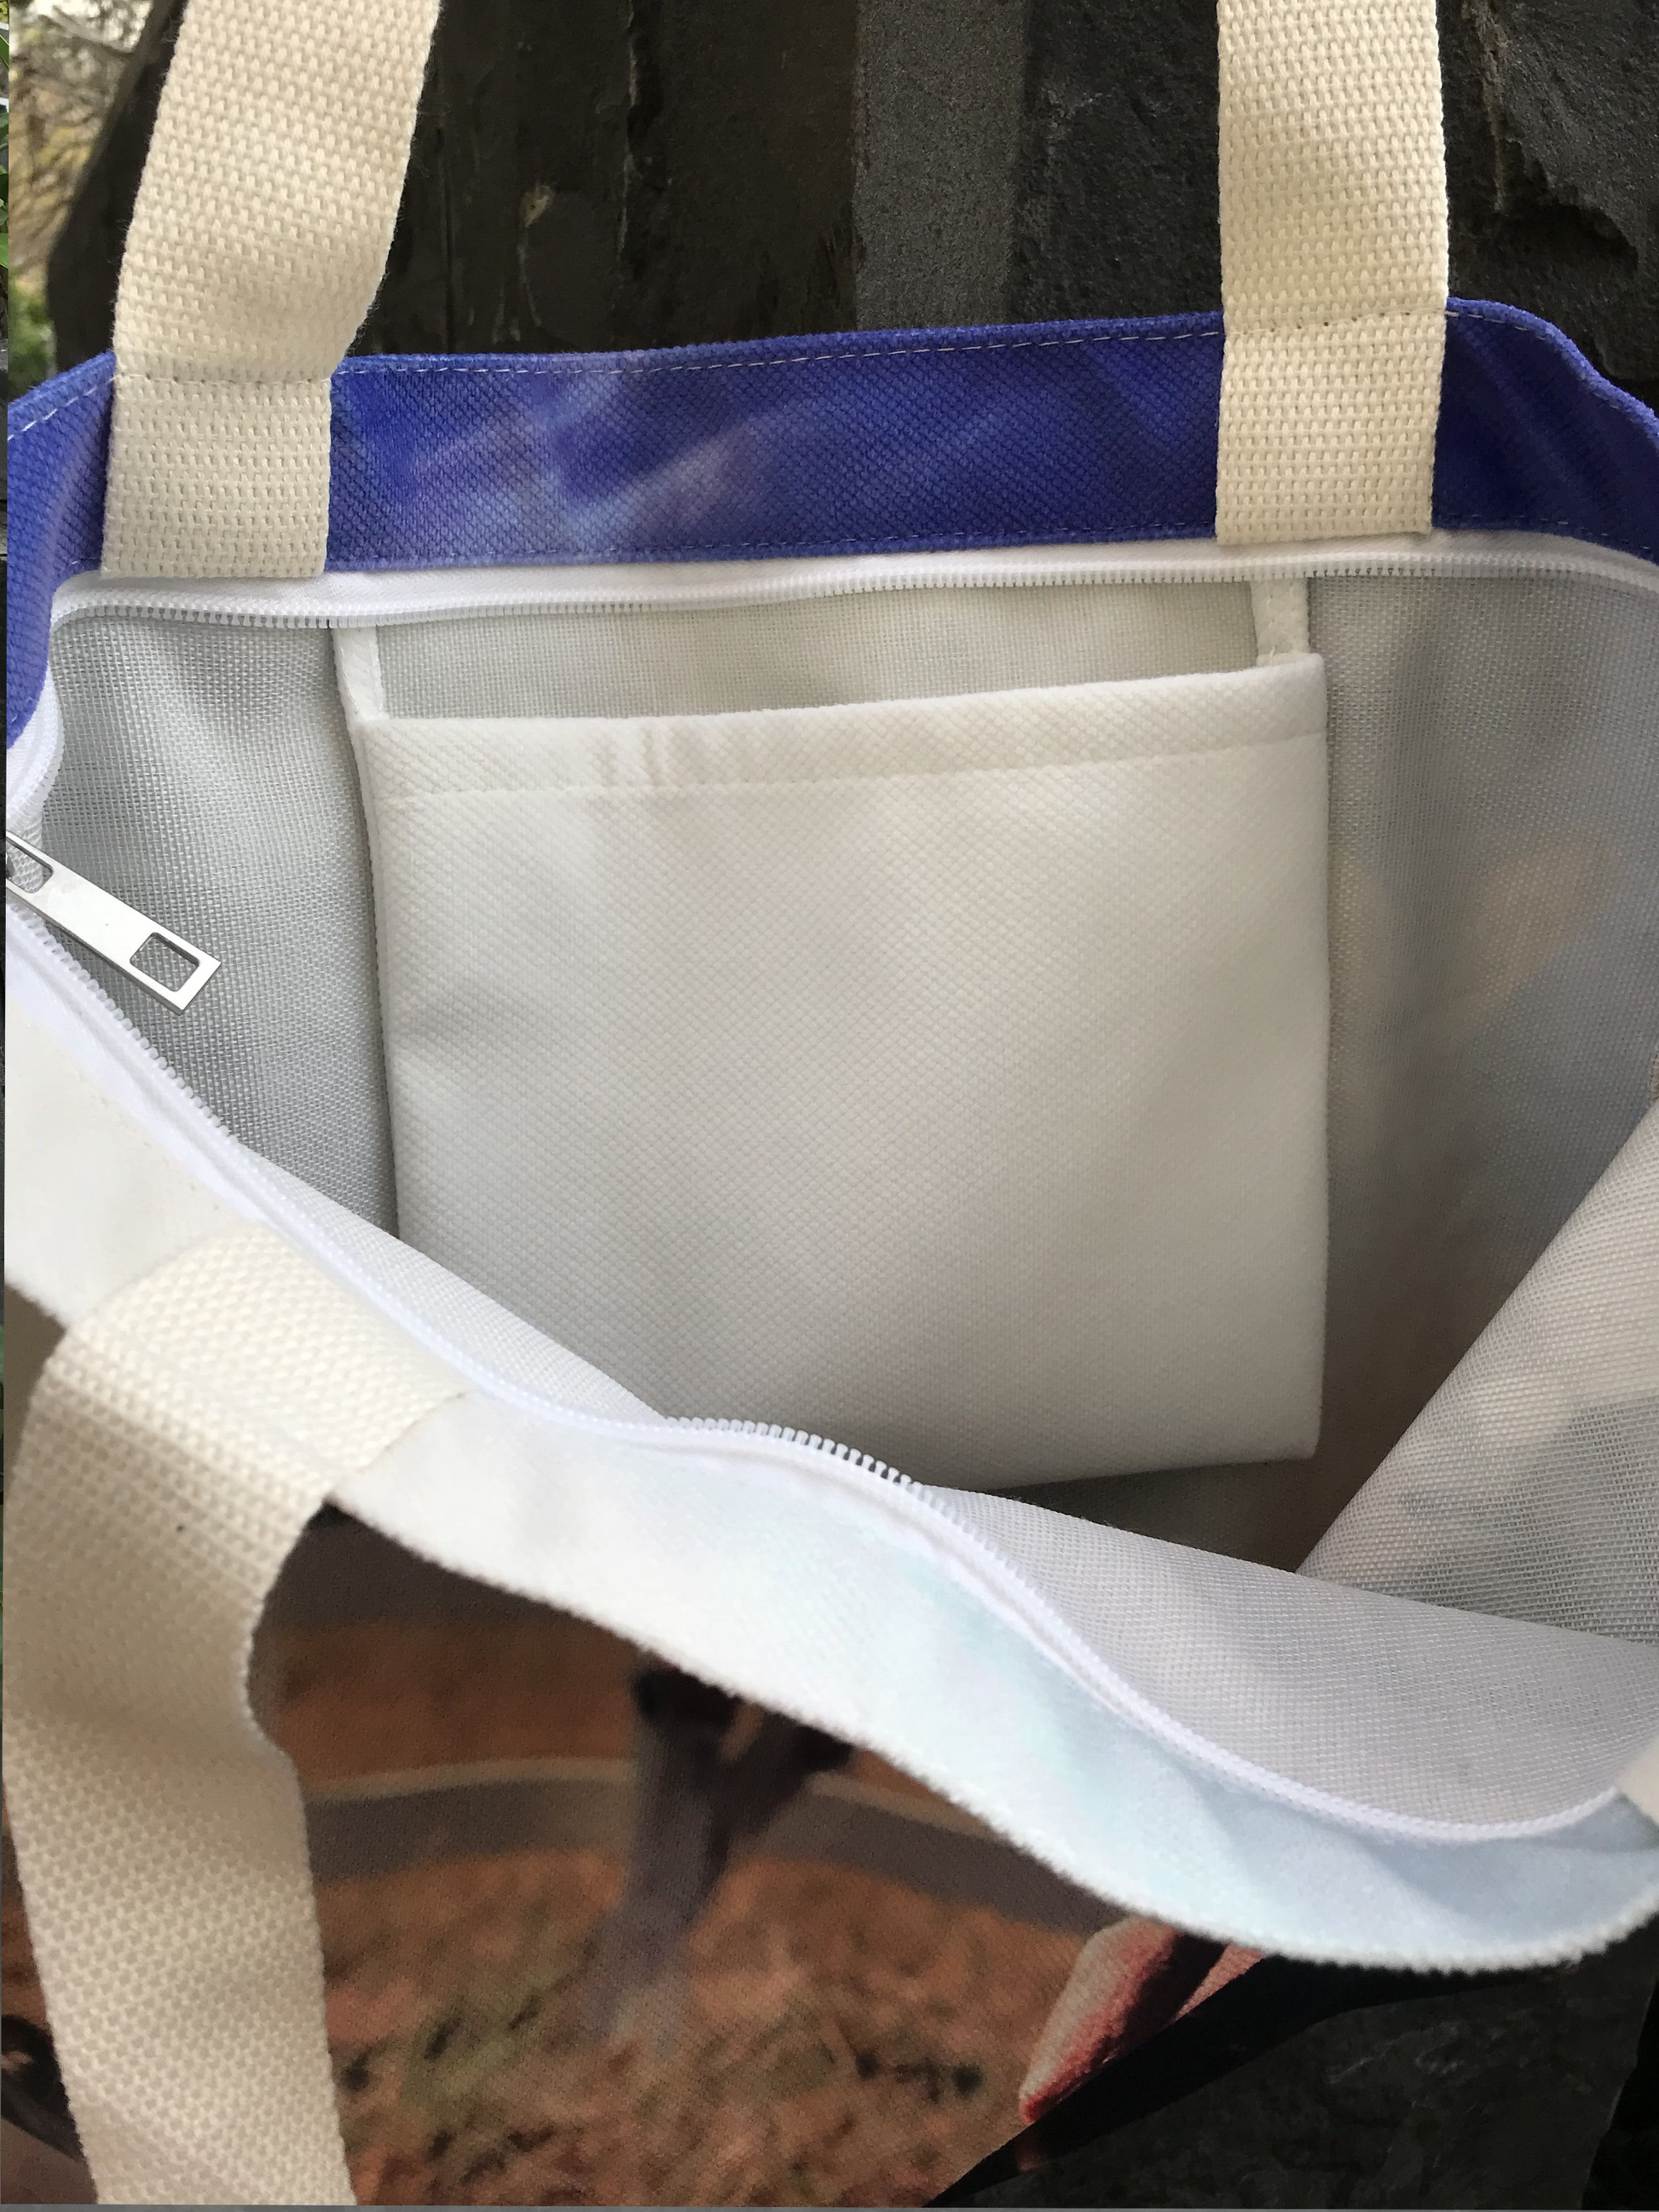 A zippered tote bag with an all white interior and an inner pocket.